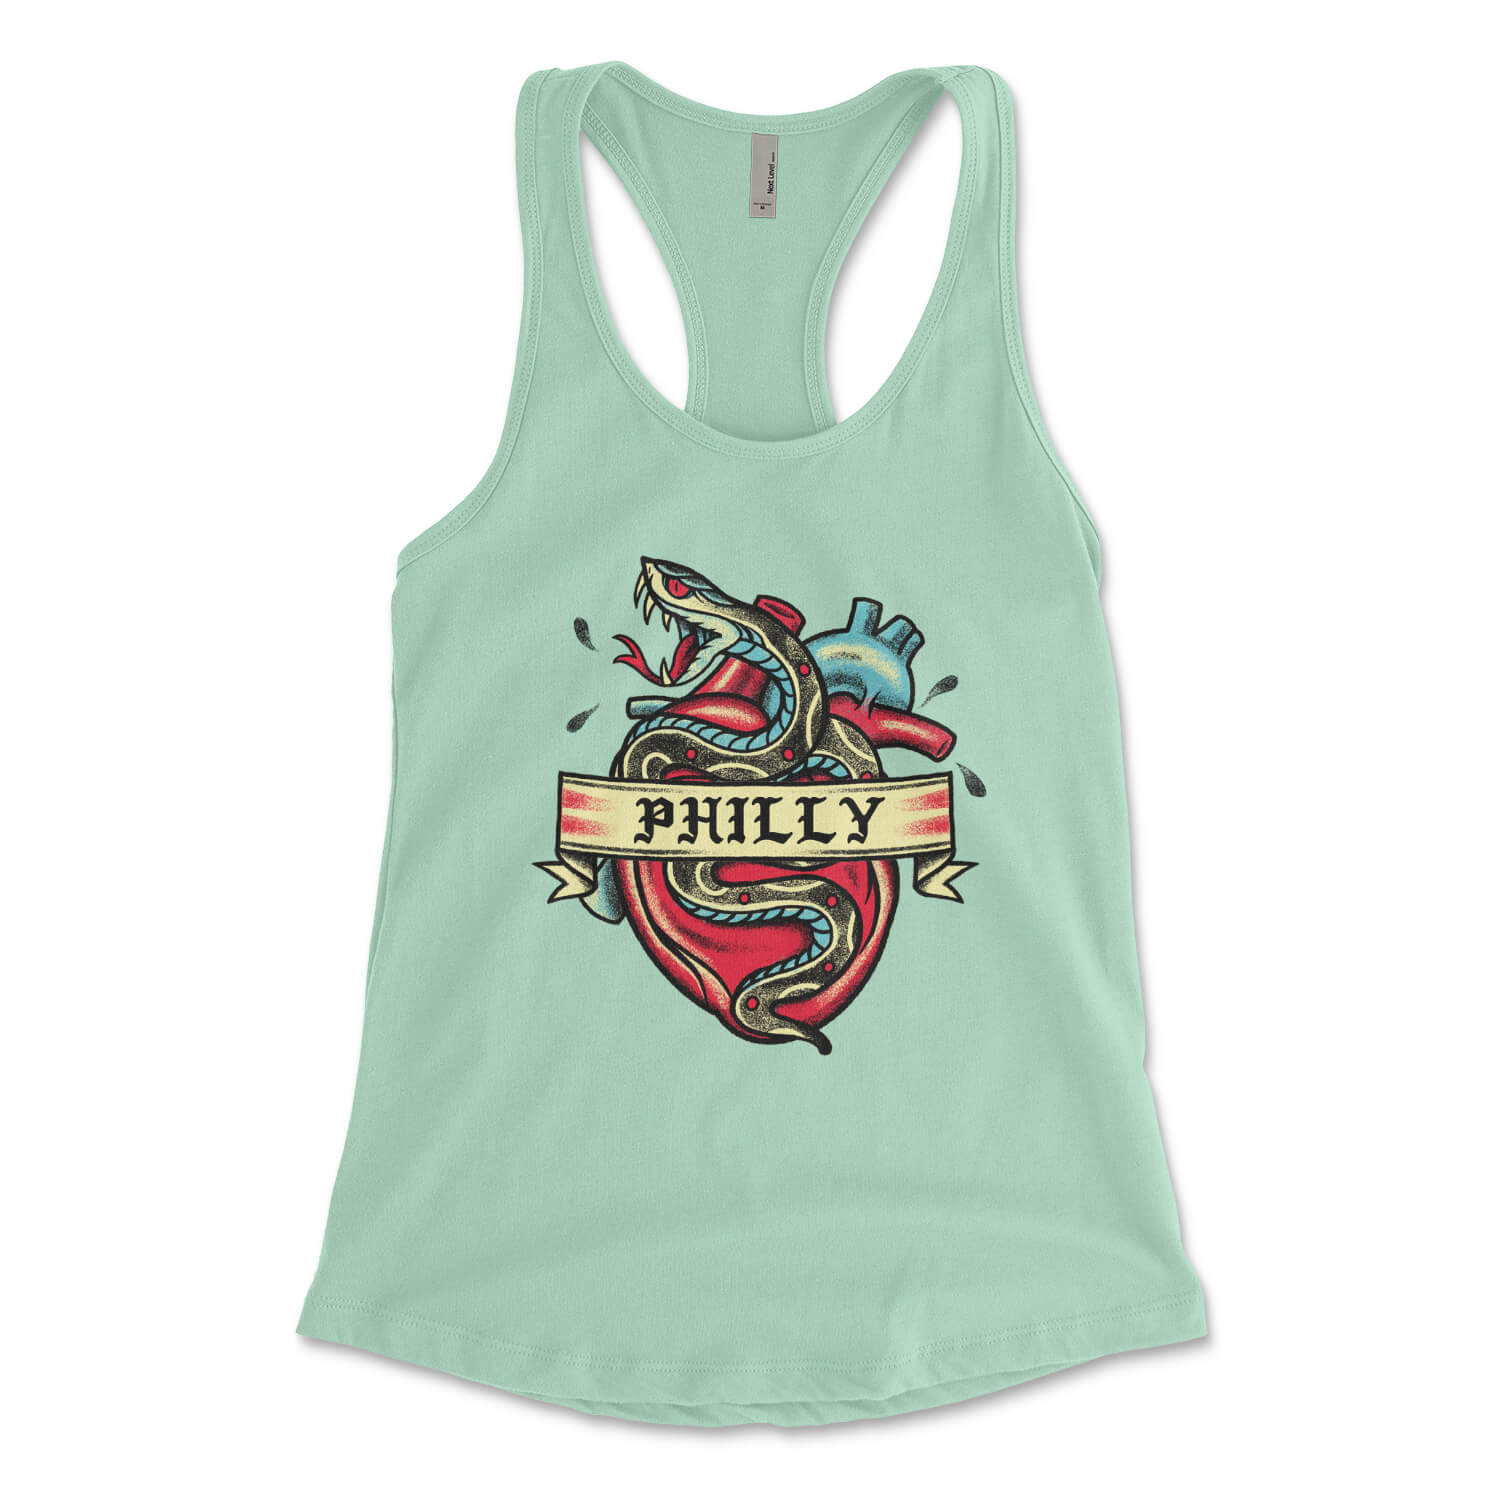 Philadelphia Philly snake tattoo on a mint green womens racerback tank top from Phillygoat